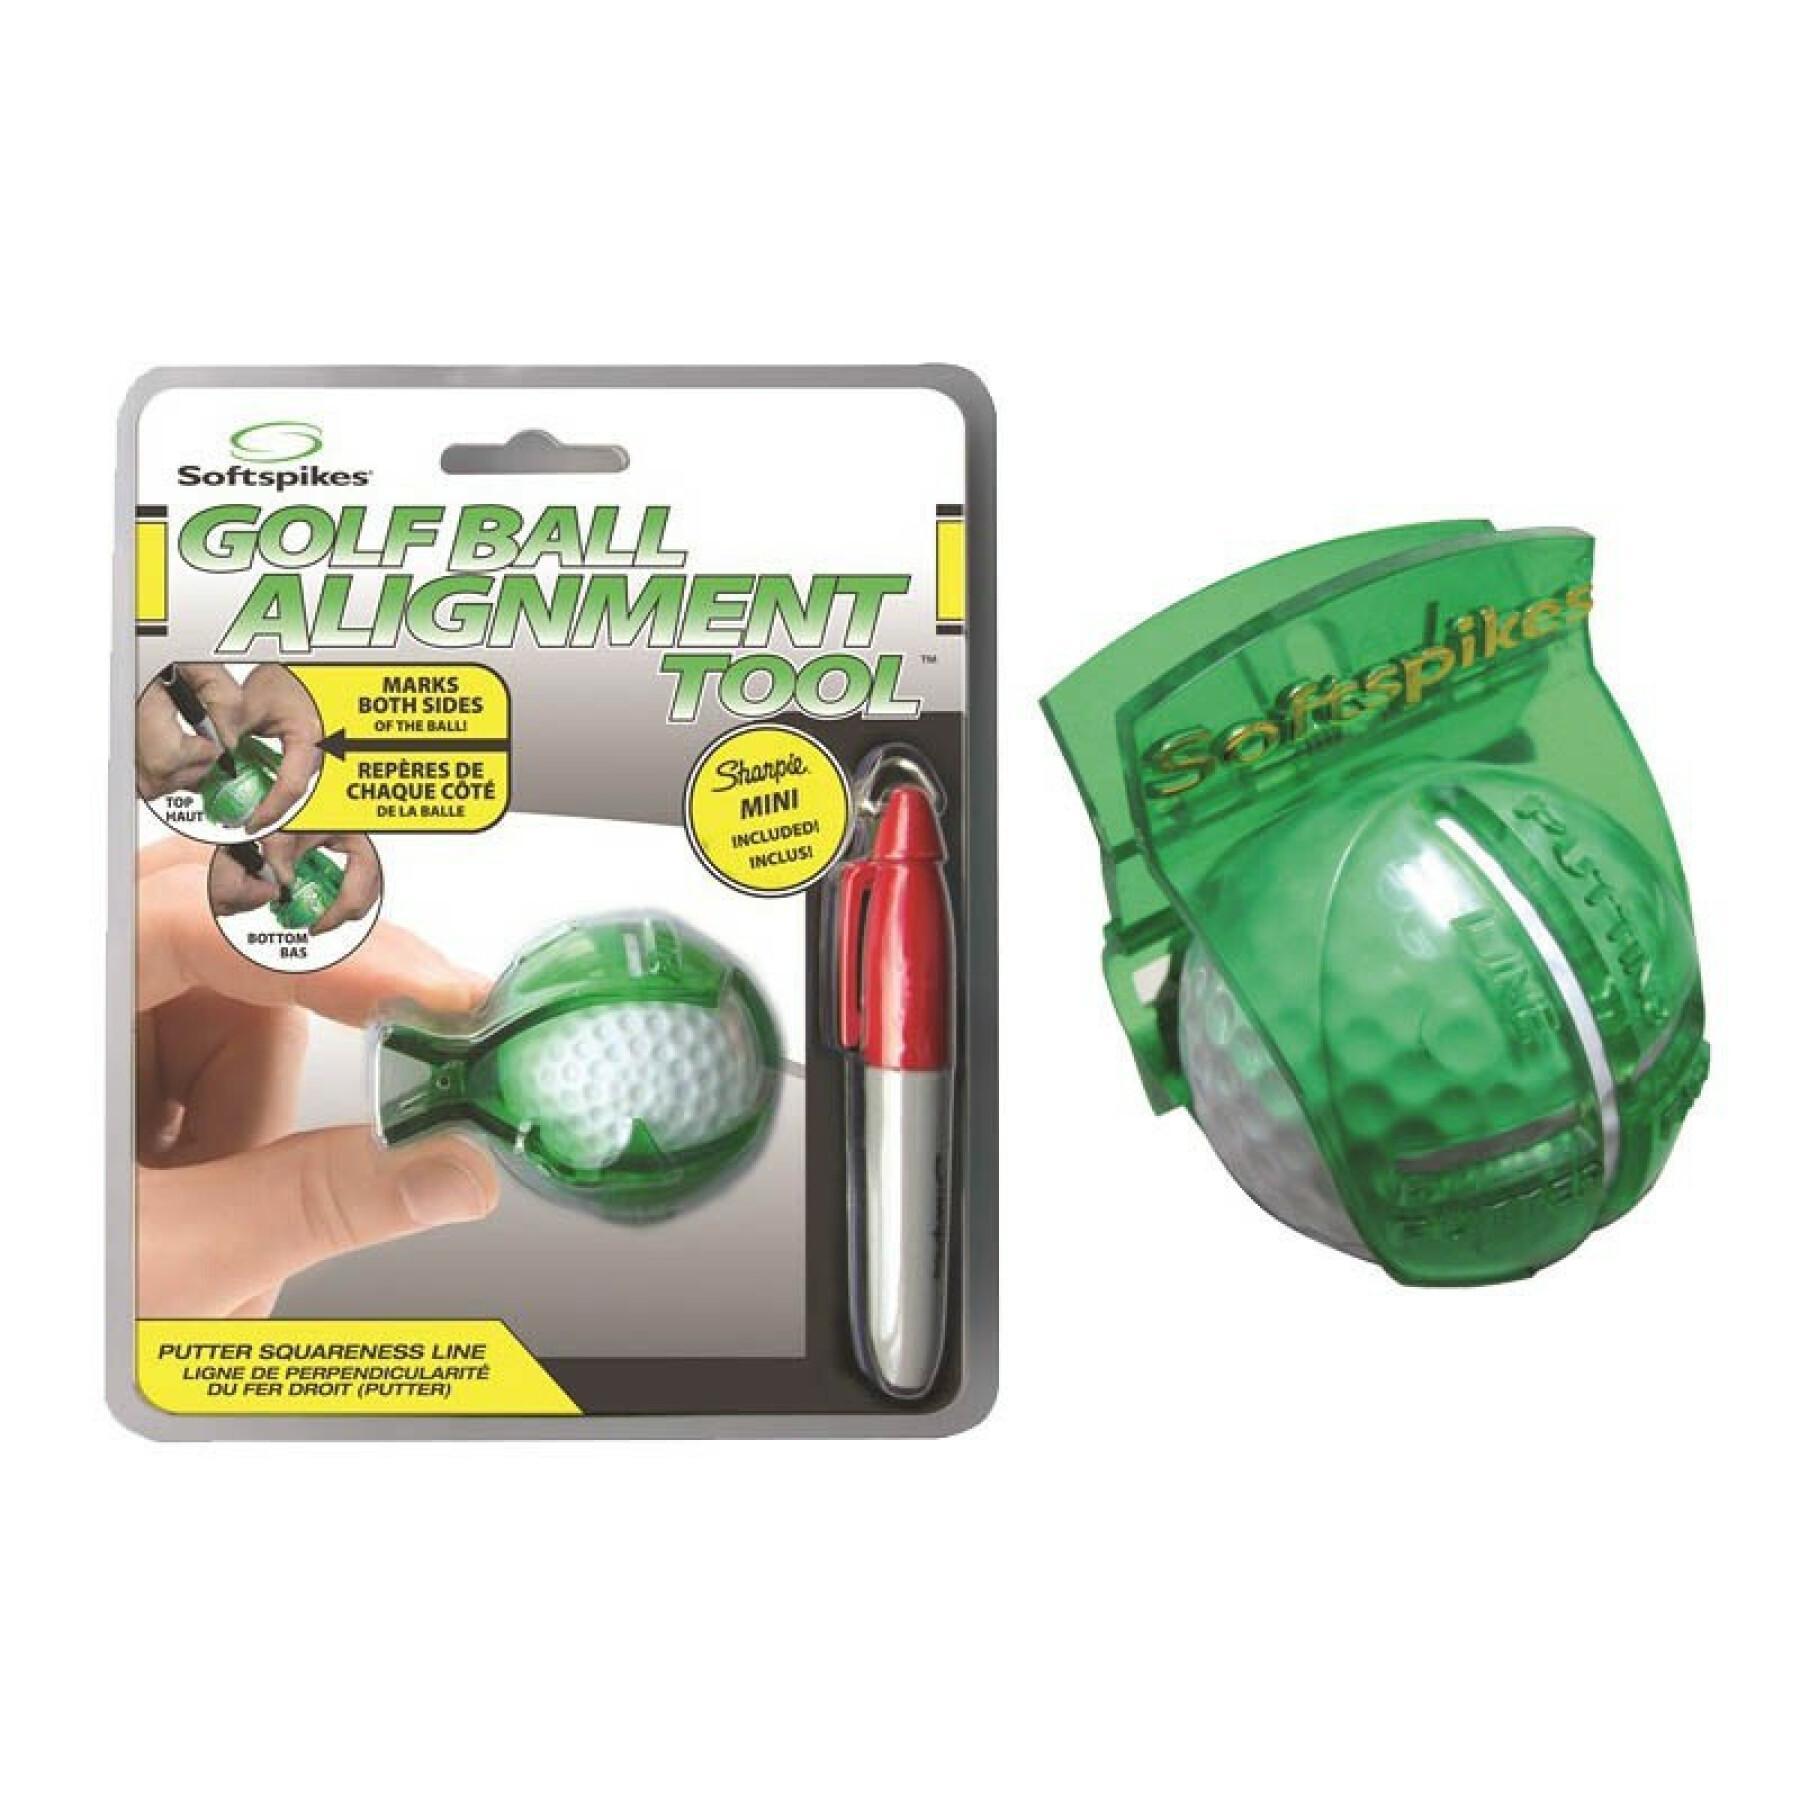 Brand ball alignment tool Softspikes